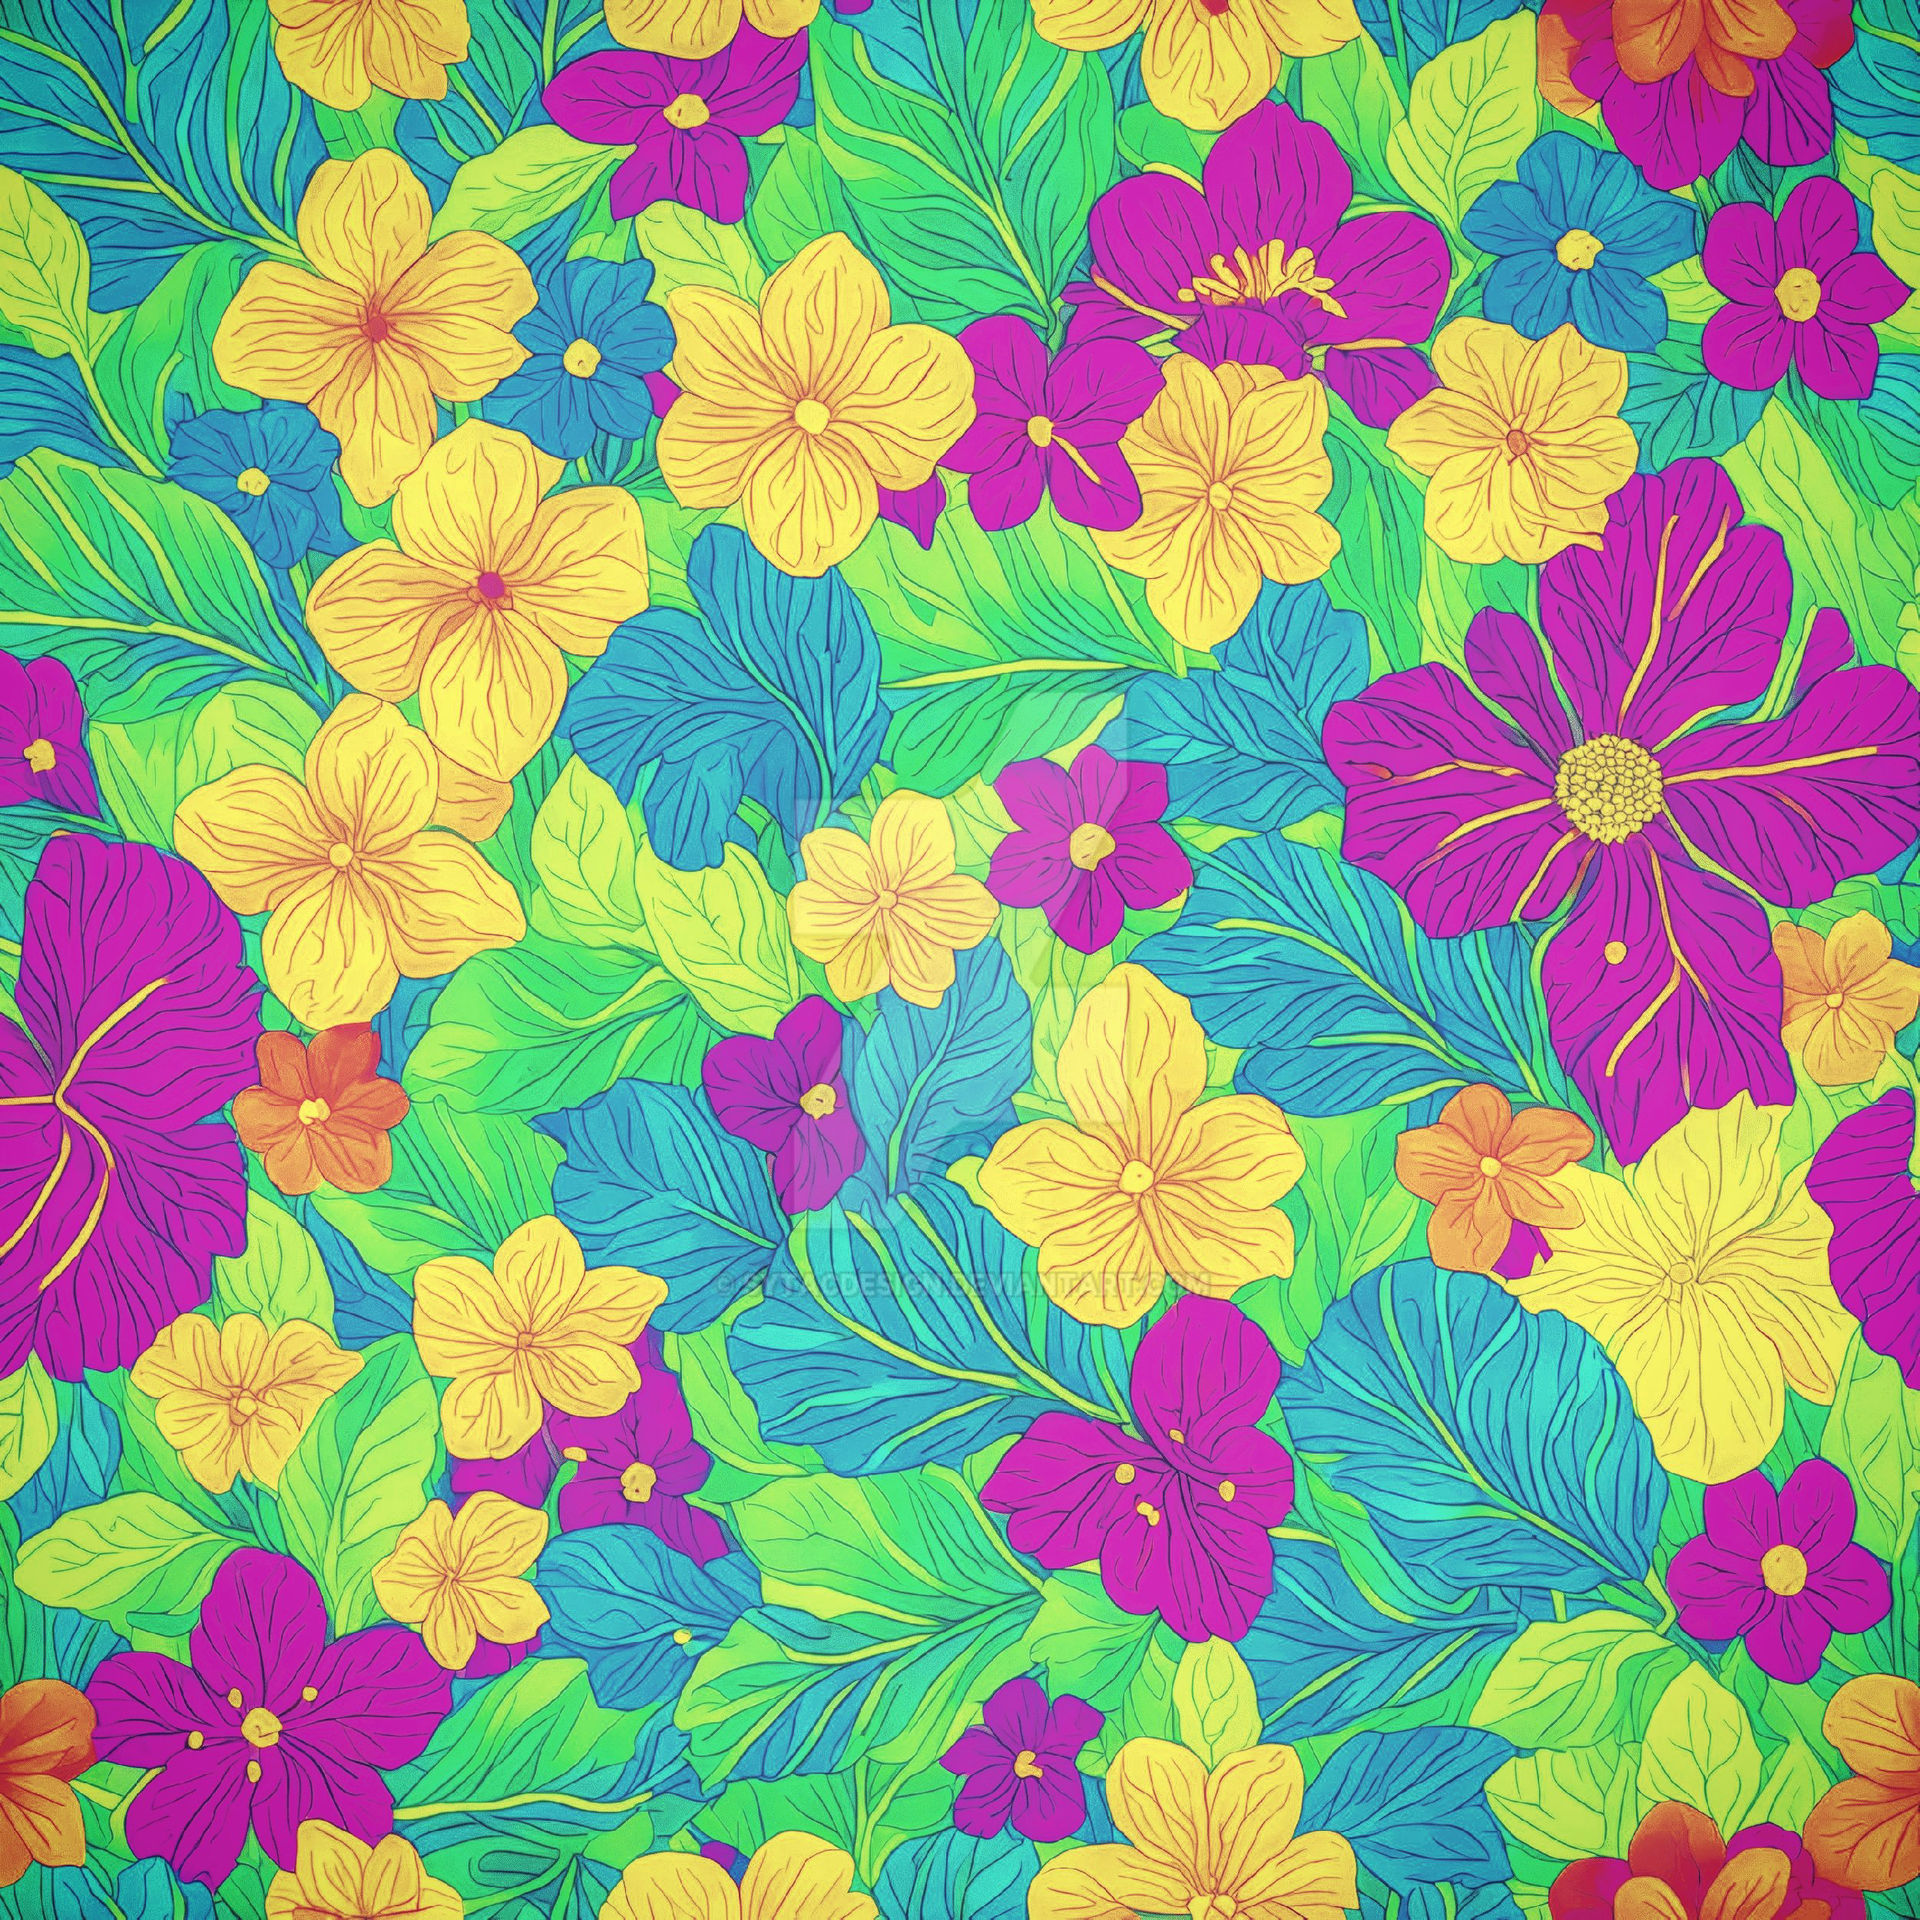 Floral Textile Flower pattern Summer Seamless Flow by sytacdesign